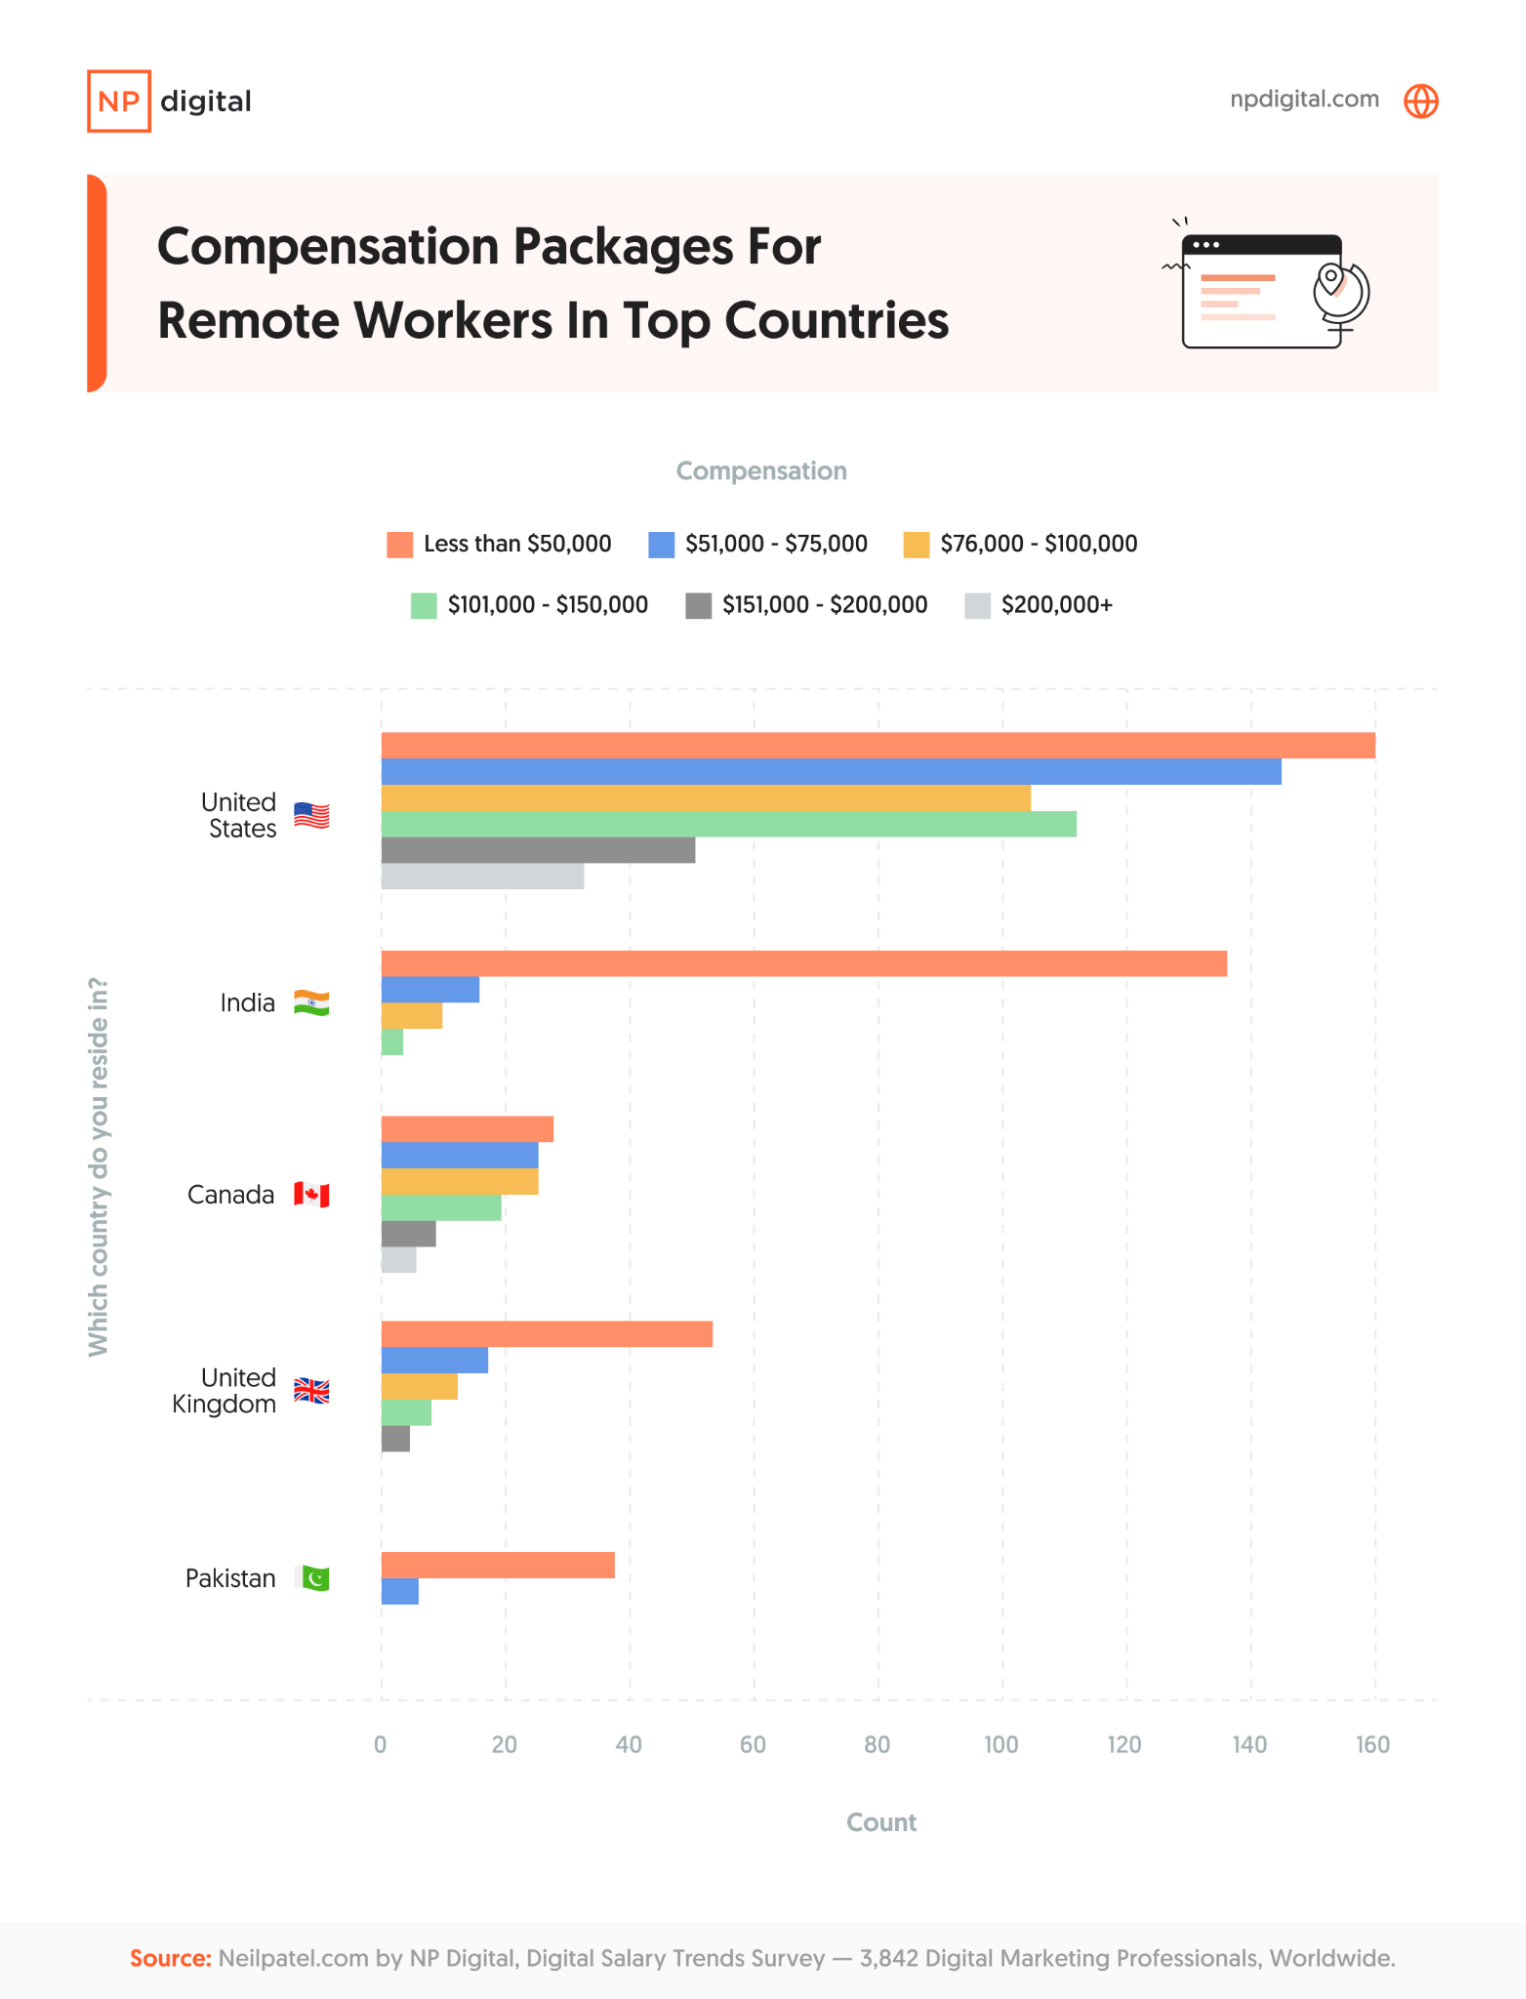 Bar chart showing compensation packages for remote workers in top countries